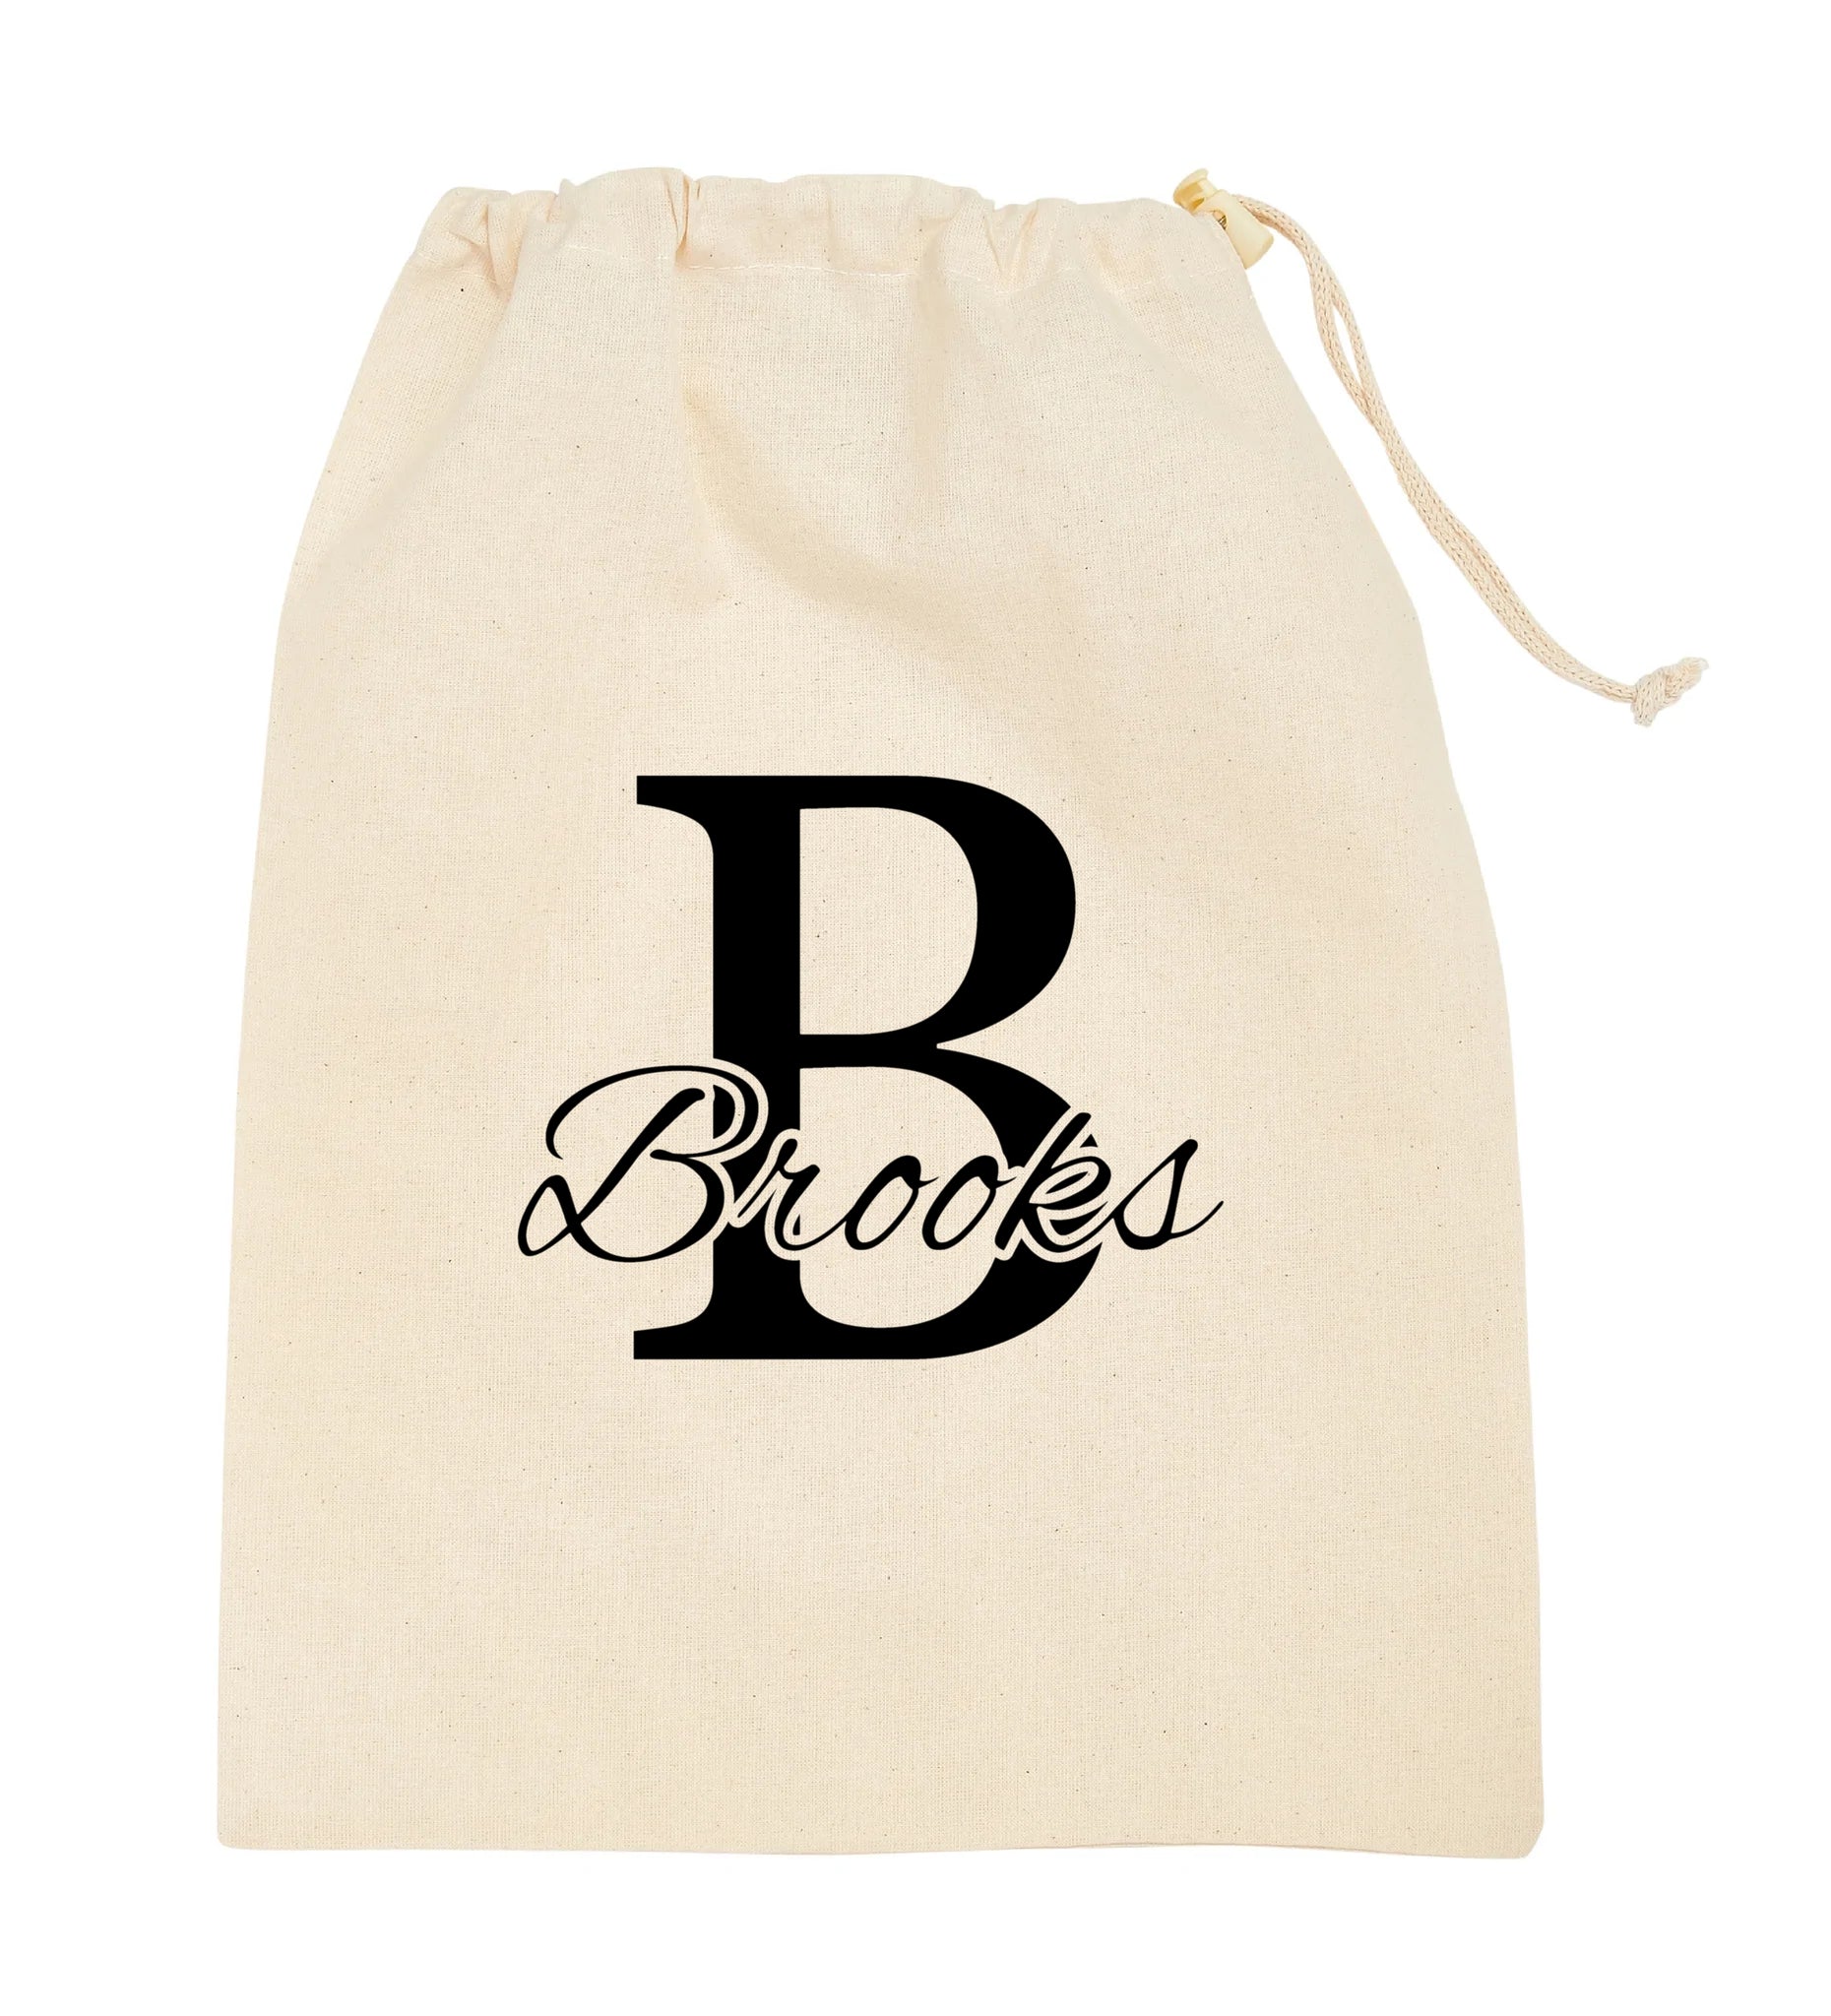 Custom Gift Bags: Personalized Logo Printed Gift Bags